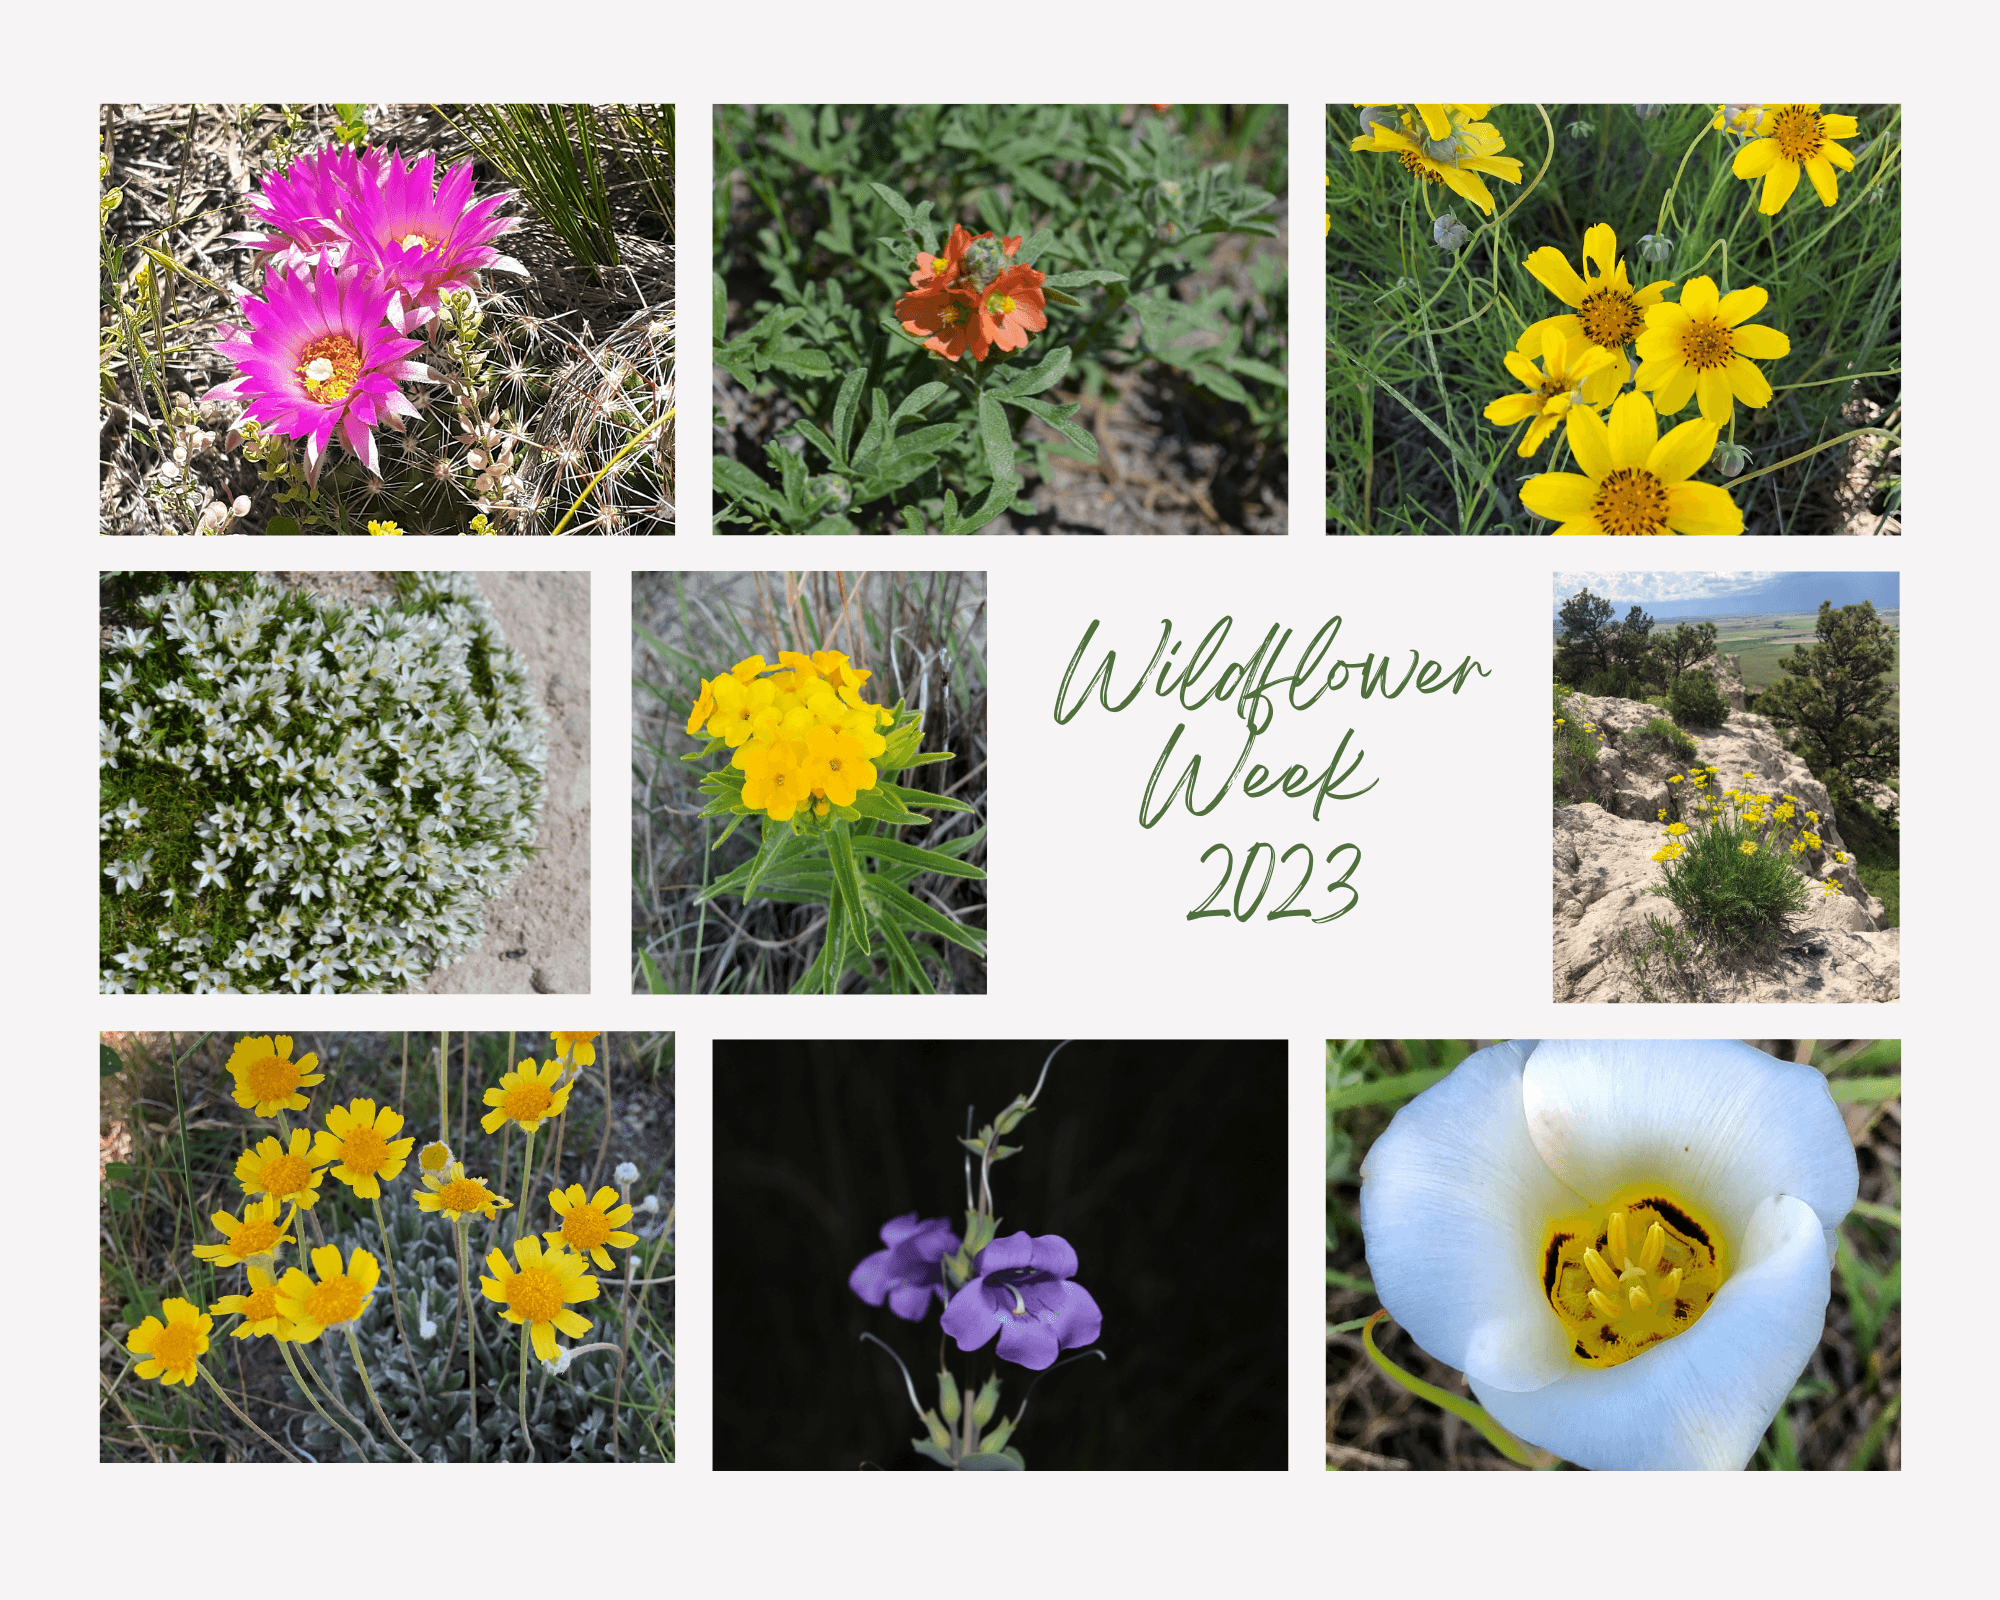 Wildflowers spotted during NSA's road trip to Western Nebraska